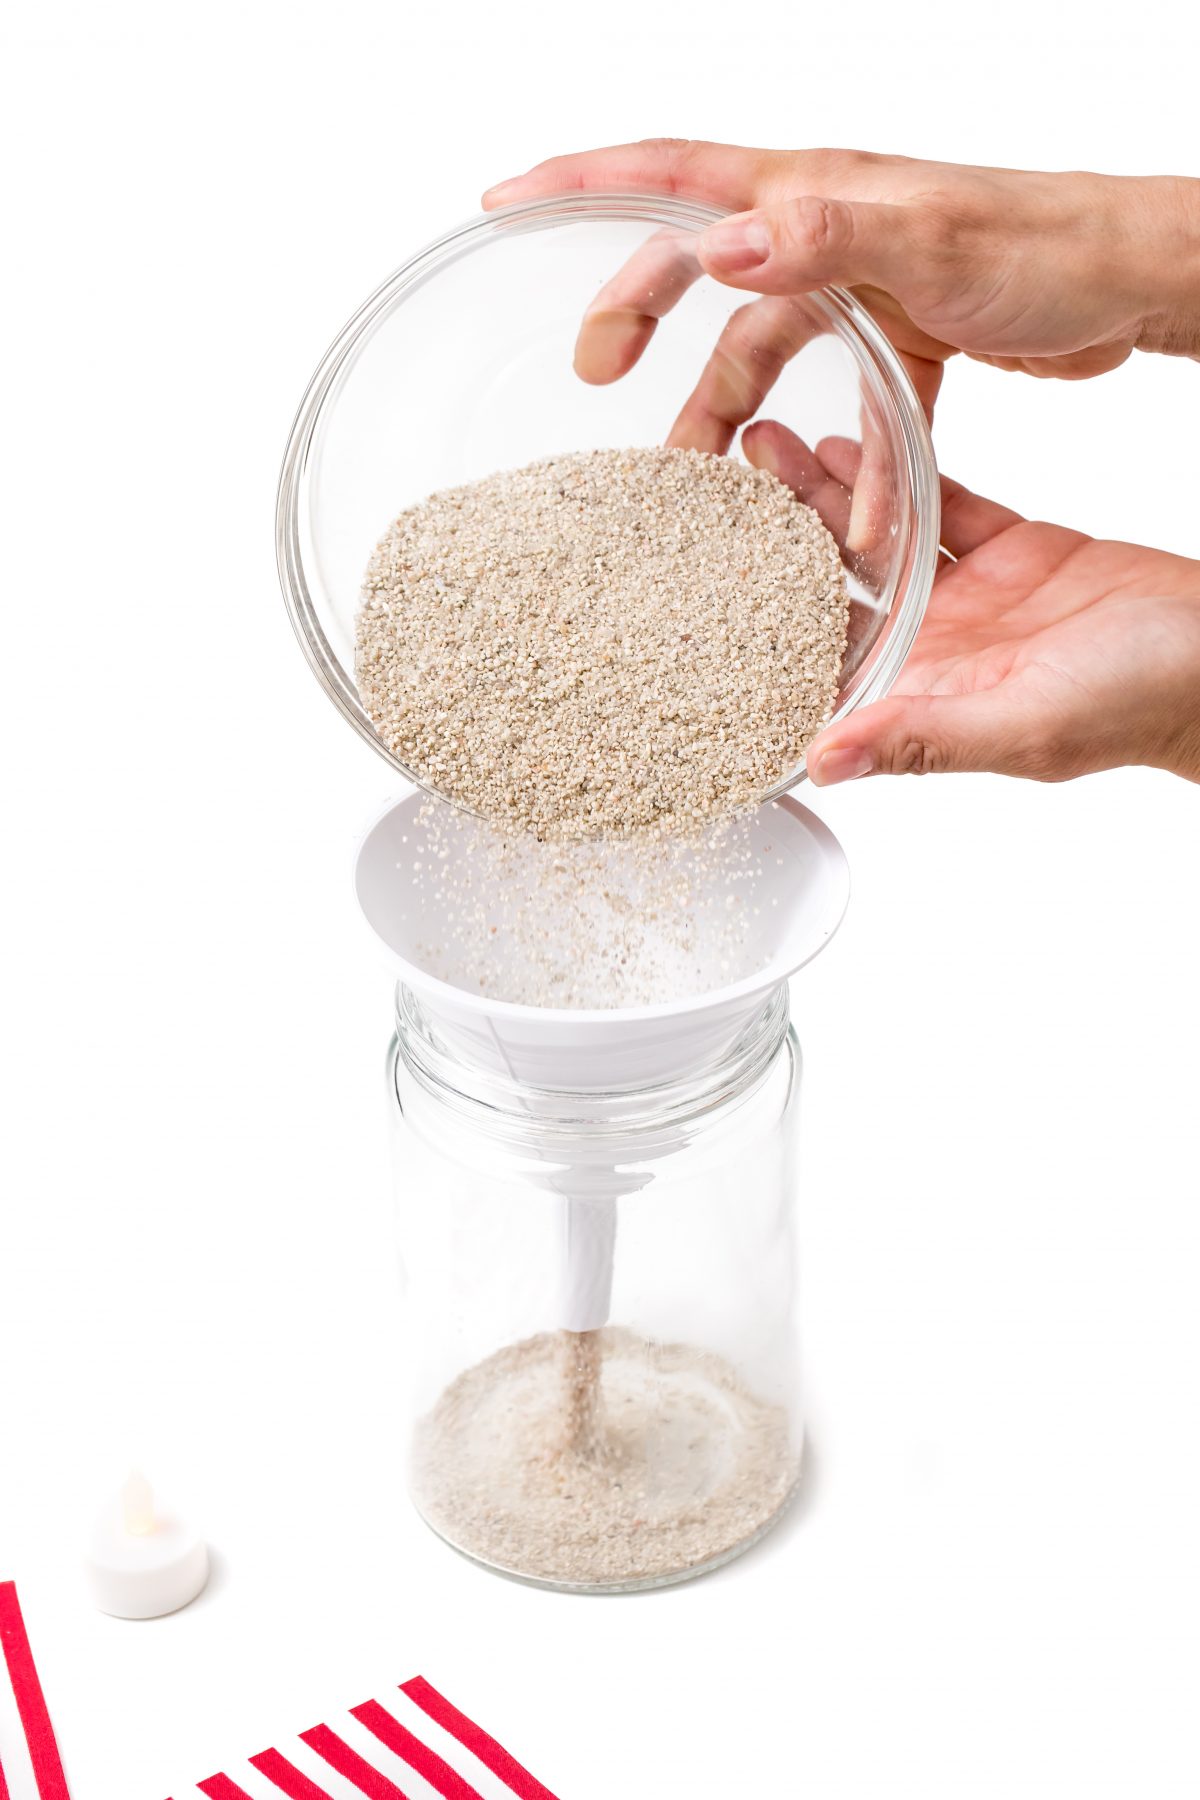 Using a funnel, pour sand into the mason jar